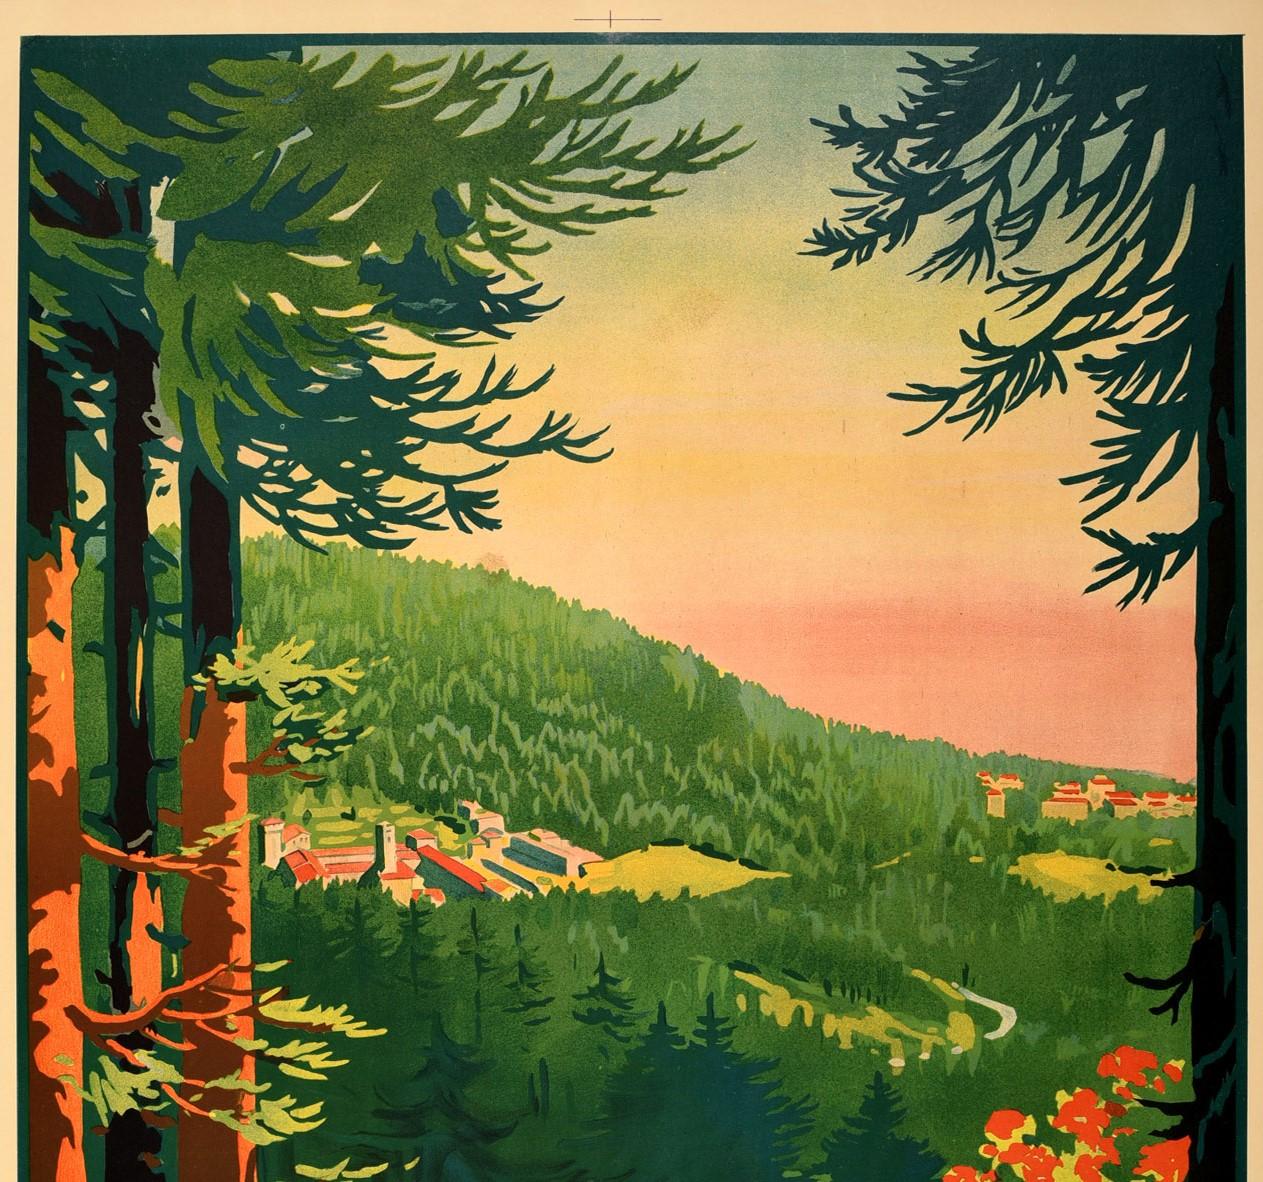 Original vintage travel poster for Vallombrosa-Saltino issued by the Italian tourist board ENIT (Ente Nazionale Italiano per il Turismo) and Italian State Railways featuring scenic artwork of villages nestled in a dense forest below a colourful sky